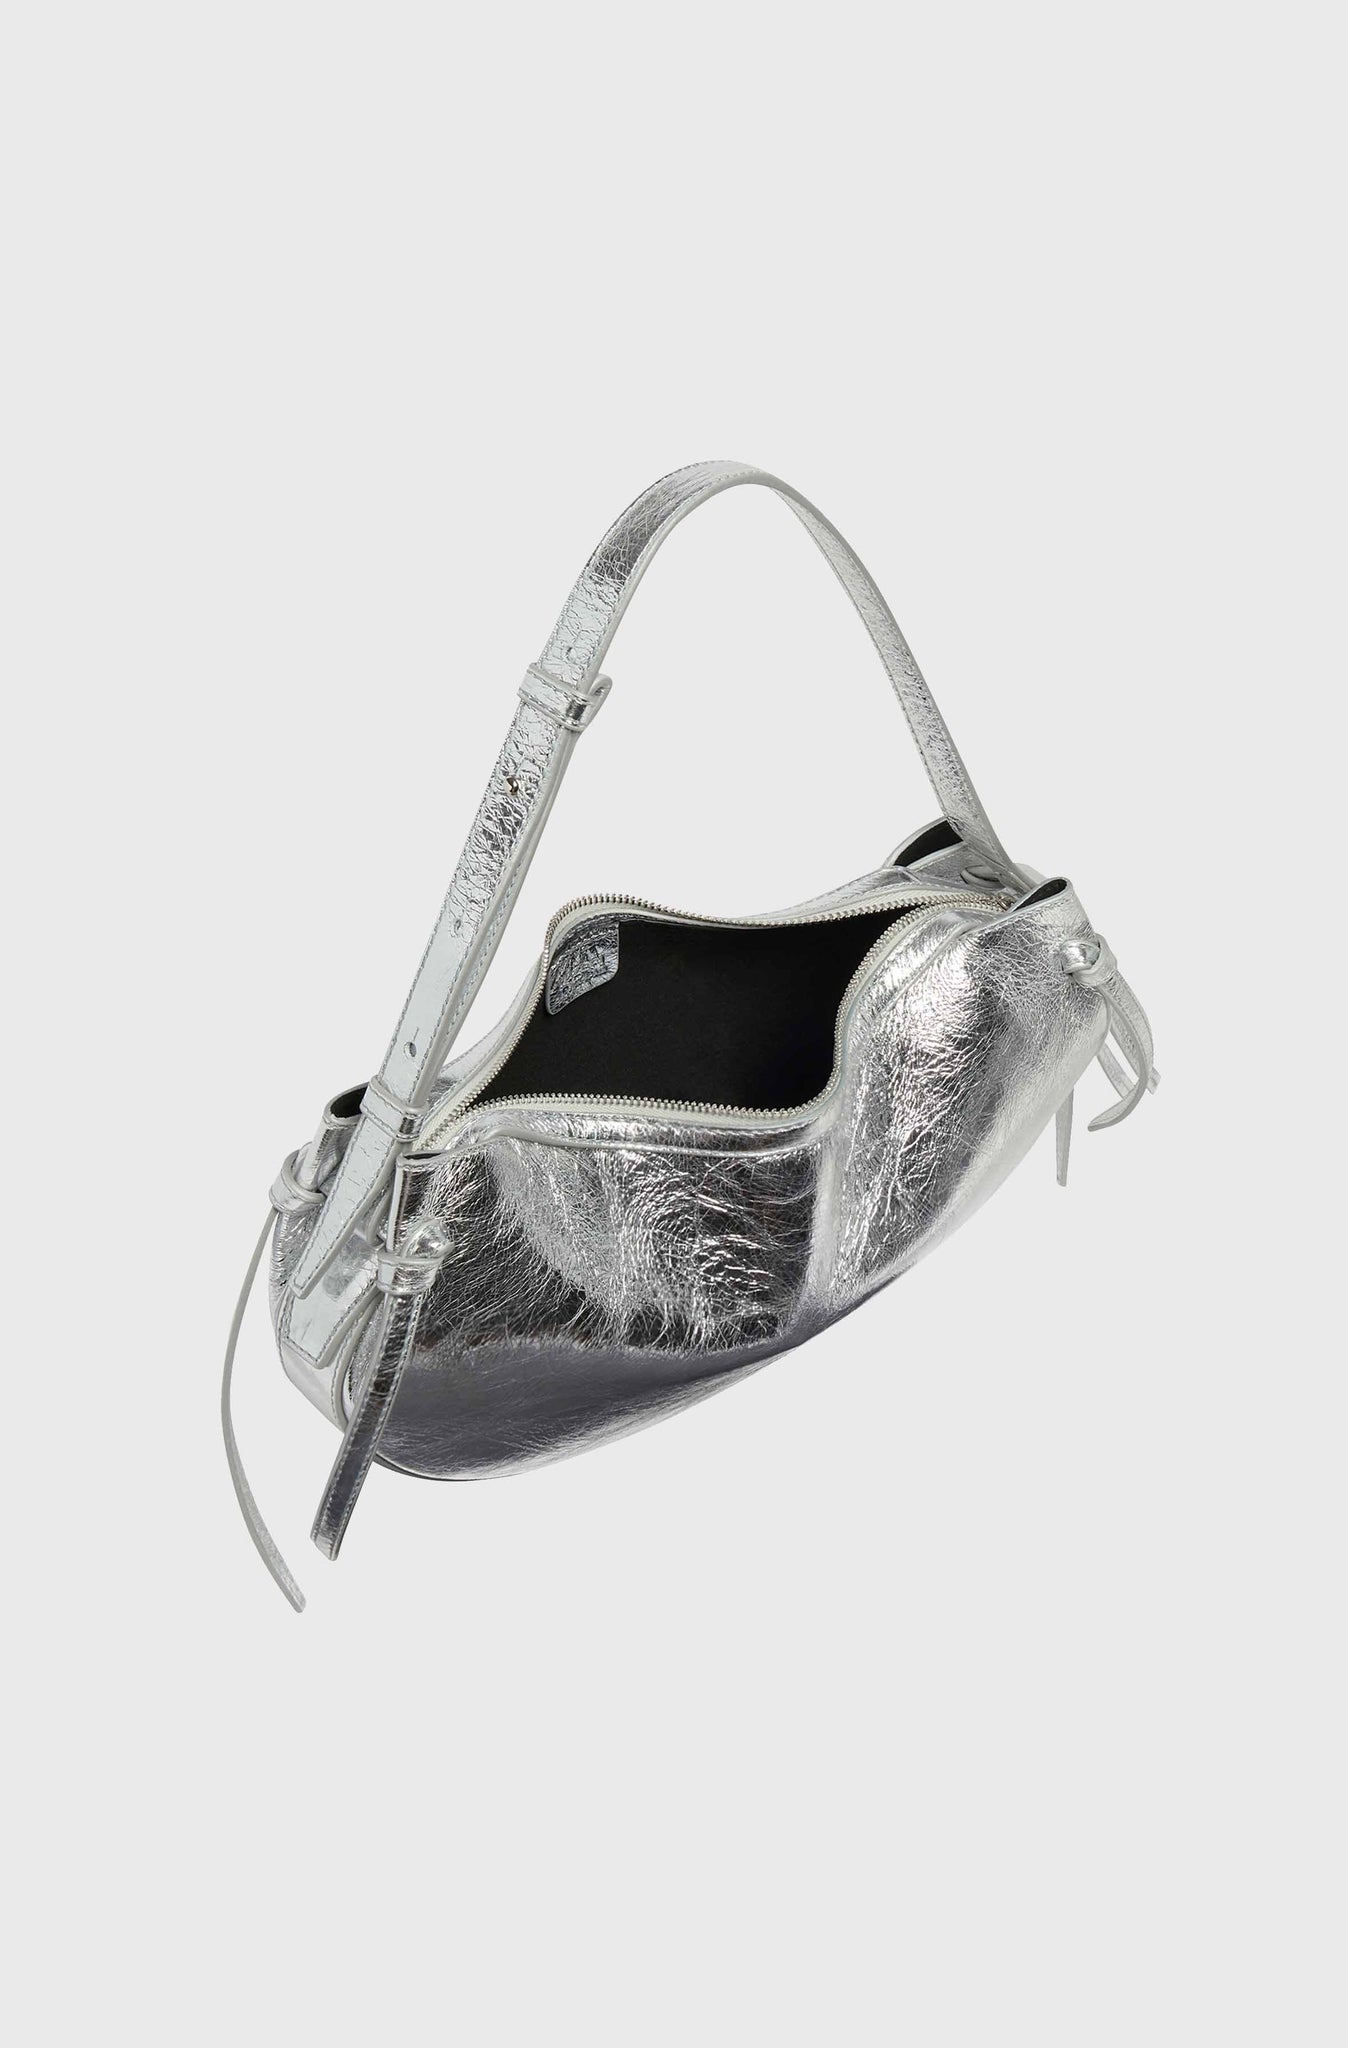 FORTUNE COOKIE - CRACKLED LEATHER SILVER